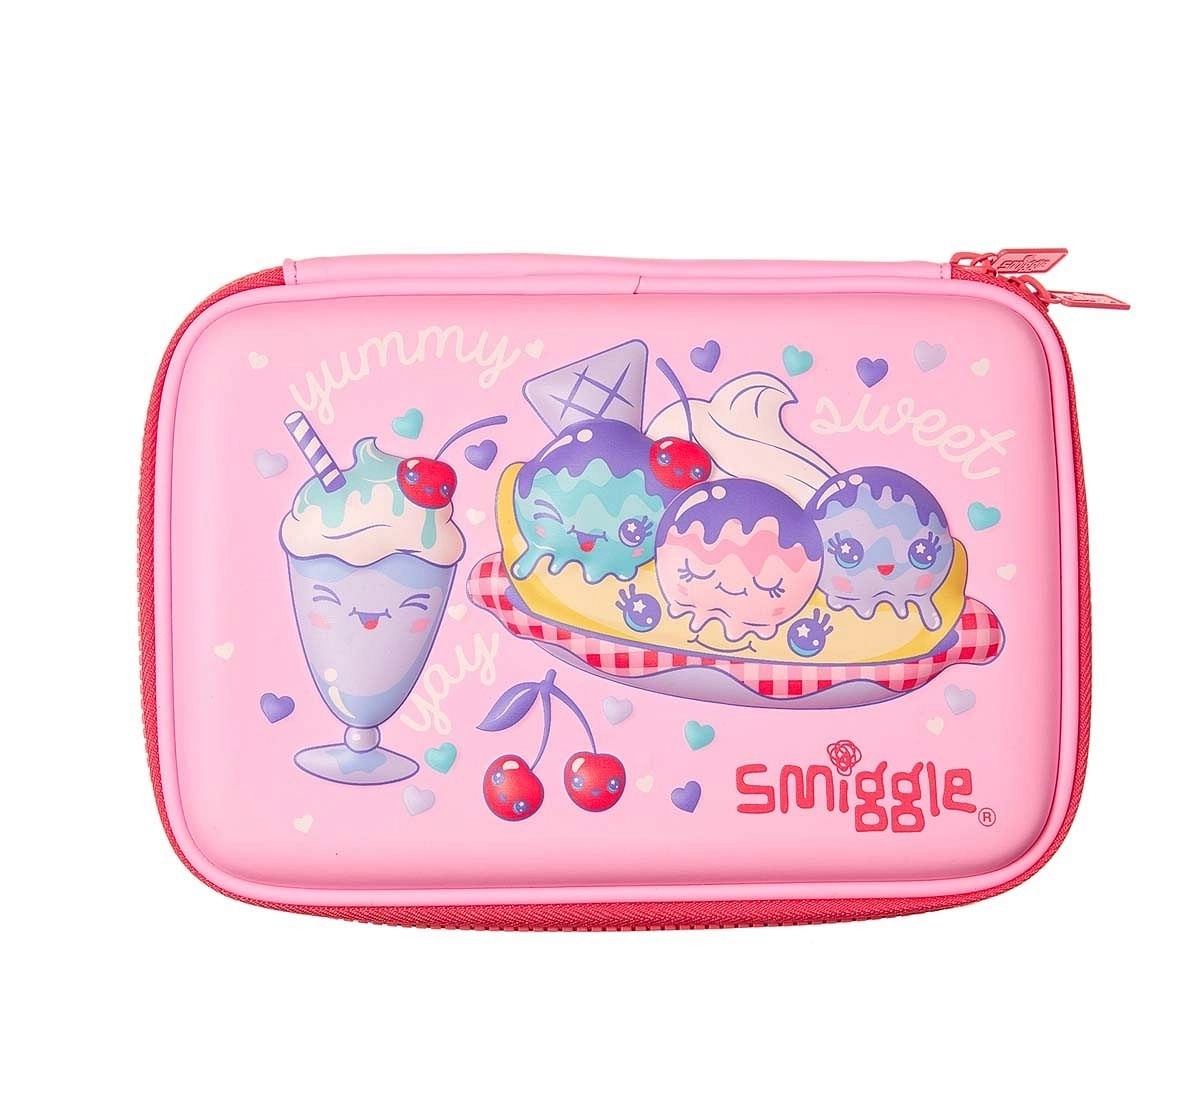 Smiggle Beyond Hardtop Pencil Case Ice-cream Print Pink Bags for Kids age 3Y+ (Pink)